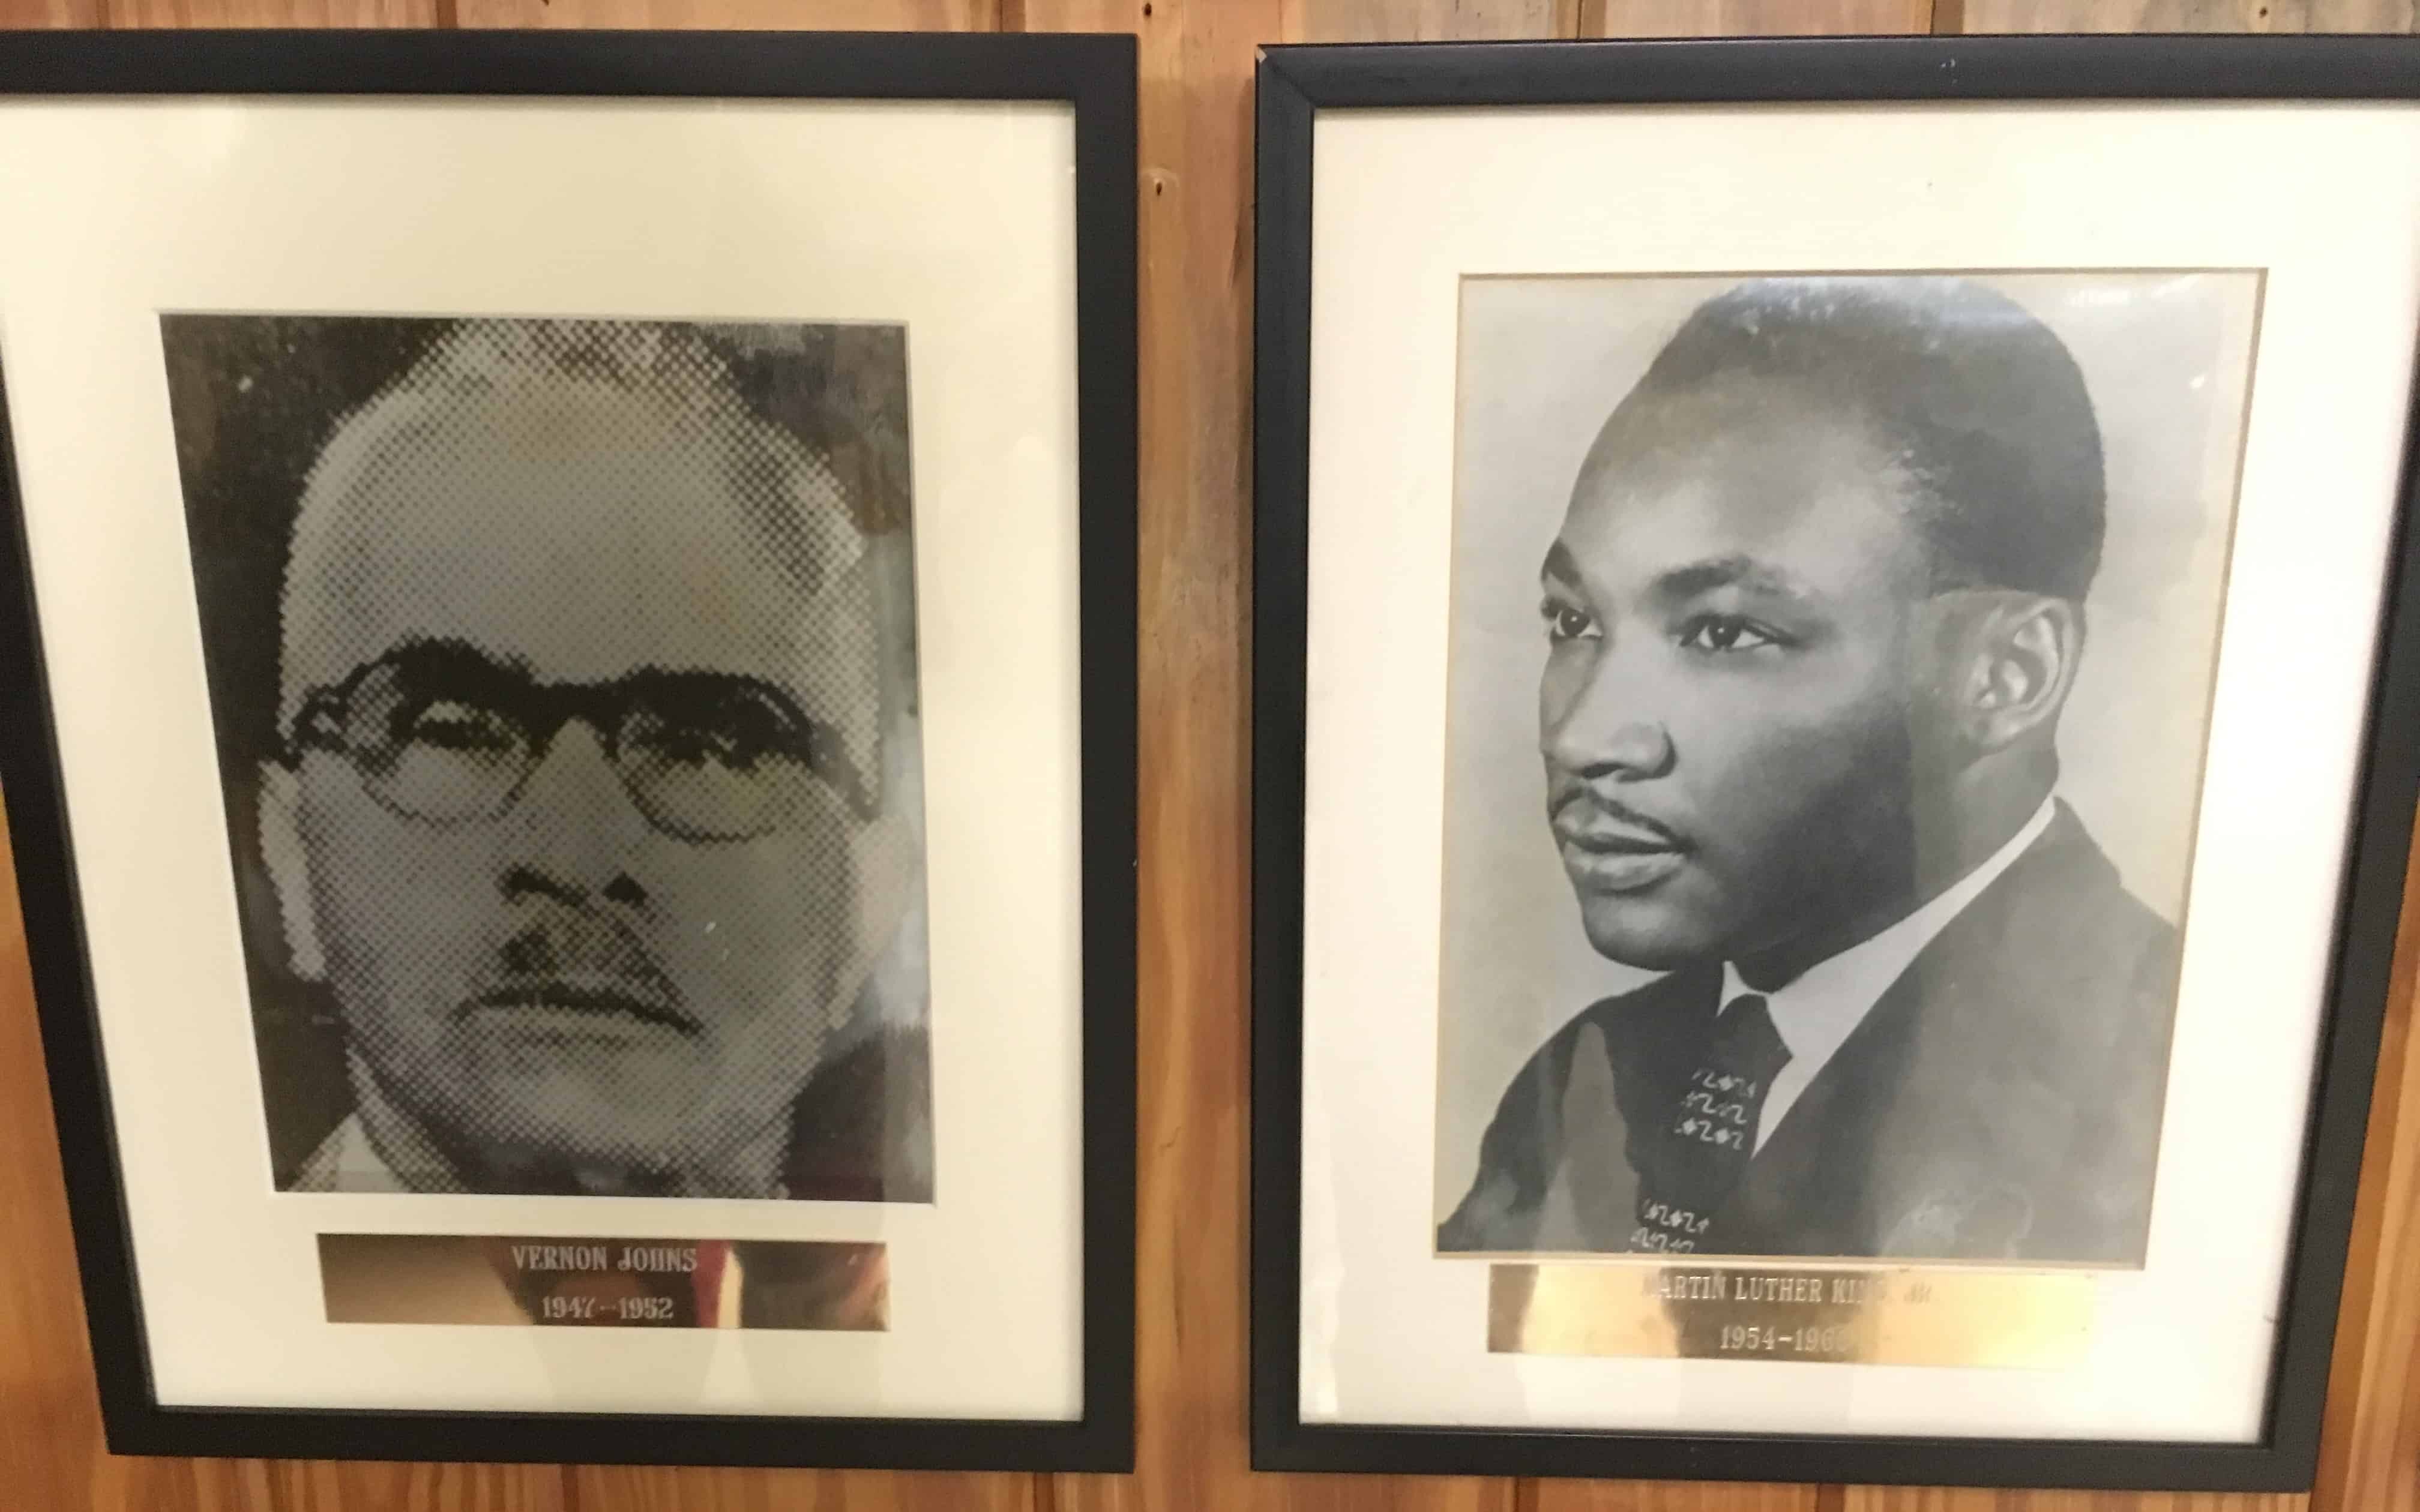 Photos of Vernon Johns (left) and Dr. Martin Luther King Jr. (right)